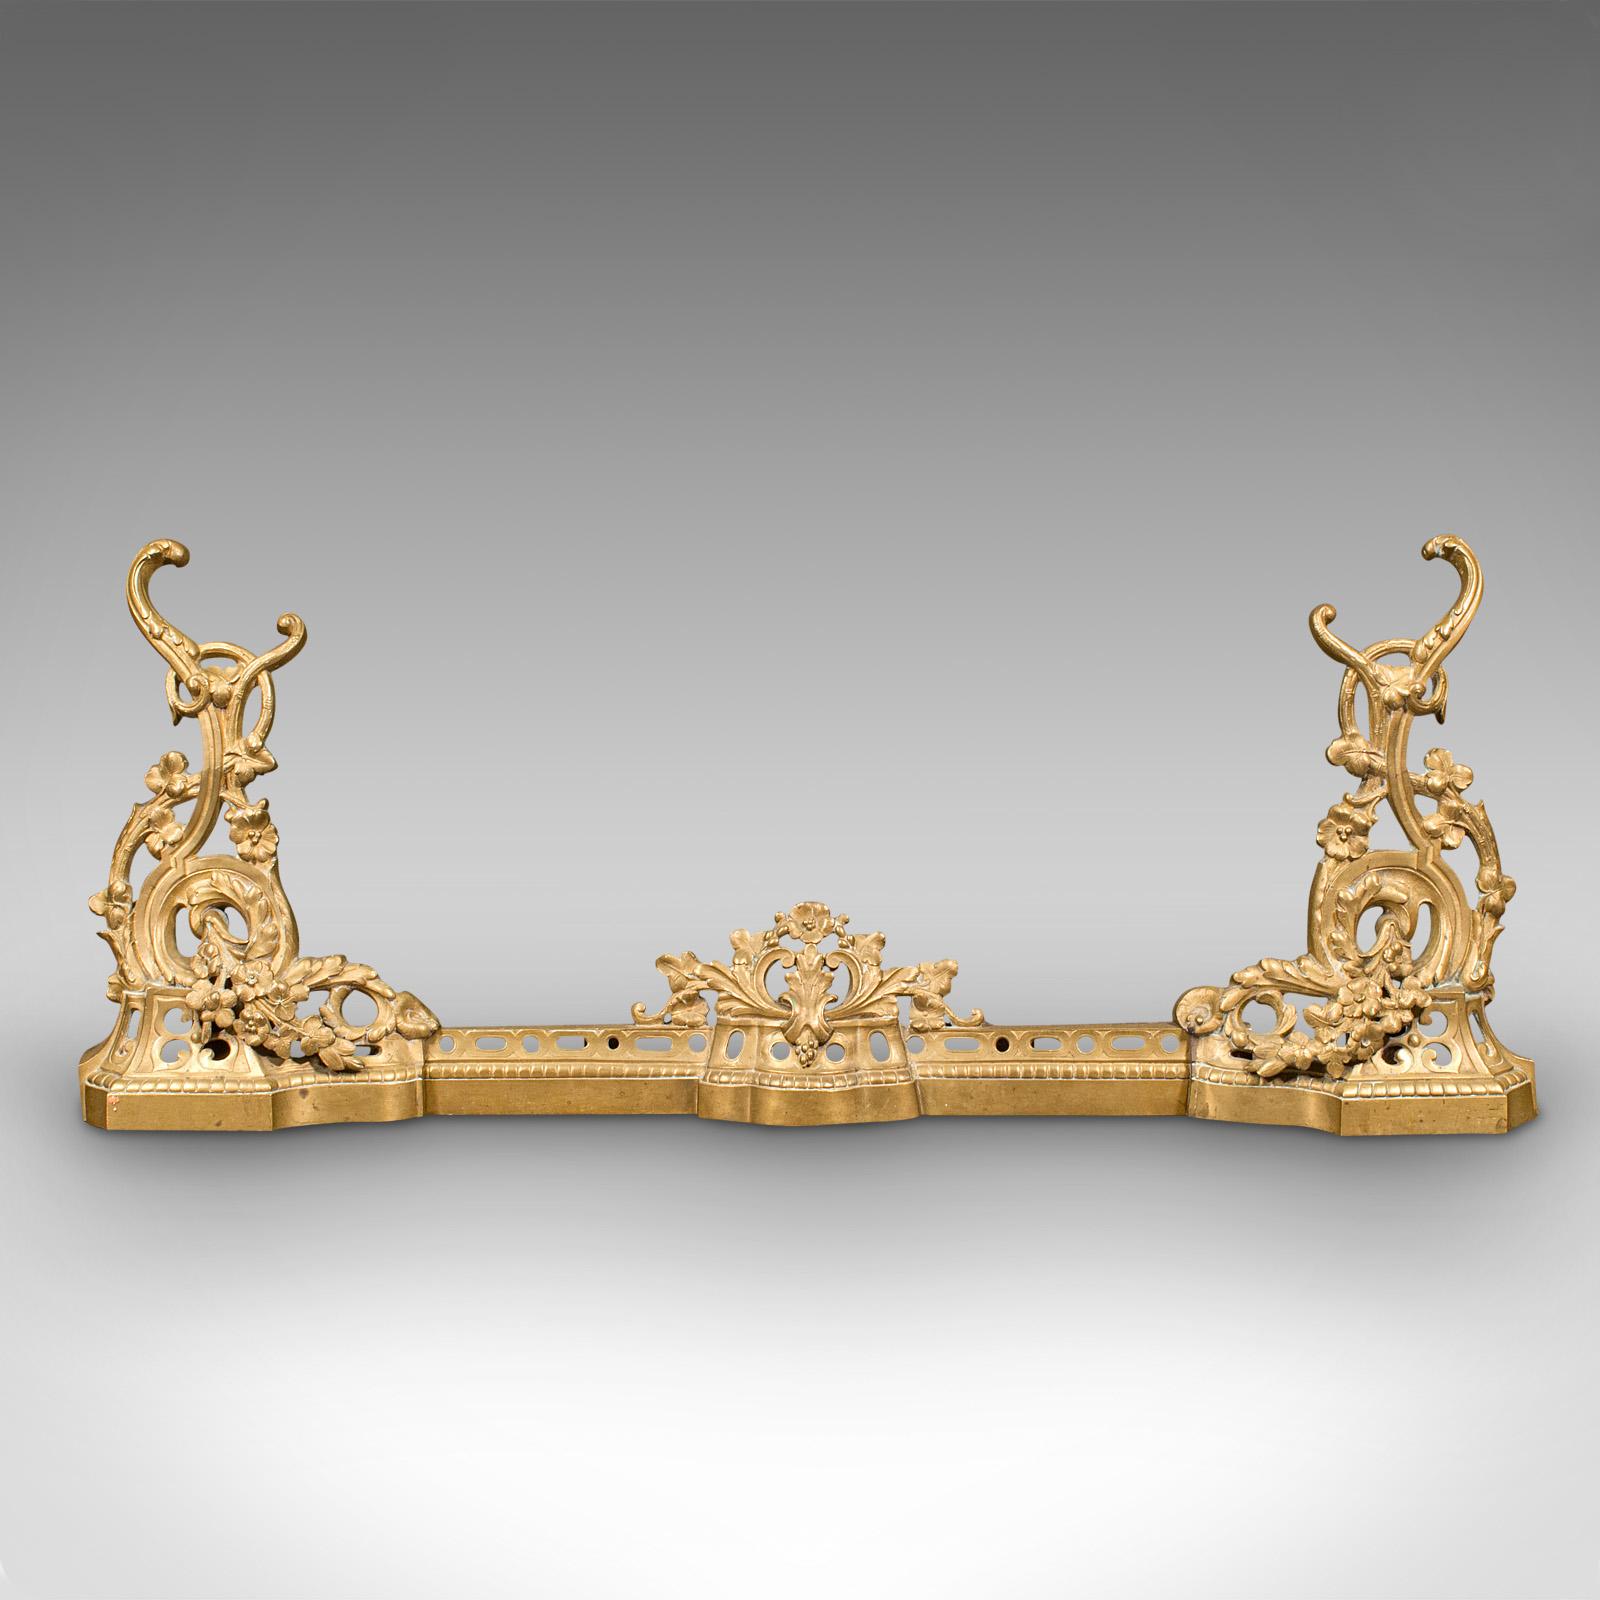 This is an antique adjustable fire kerb. An English, gilt metal fireplace fender with Art Nouveau overtones, dating to the late Victorian period, circa 1900.

Dashing elegance to enhance the fireplace - adjusts from 37